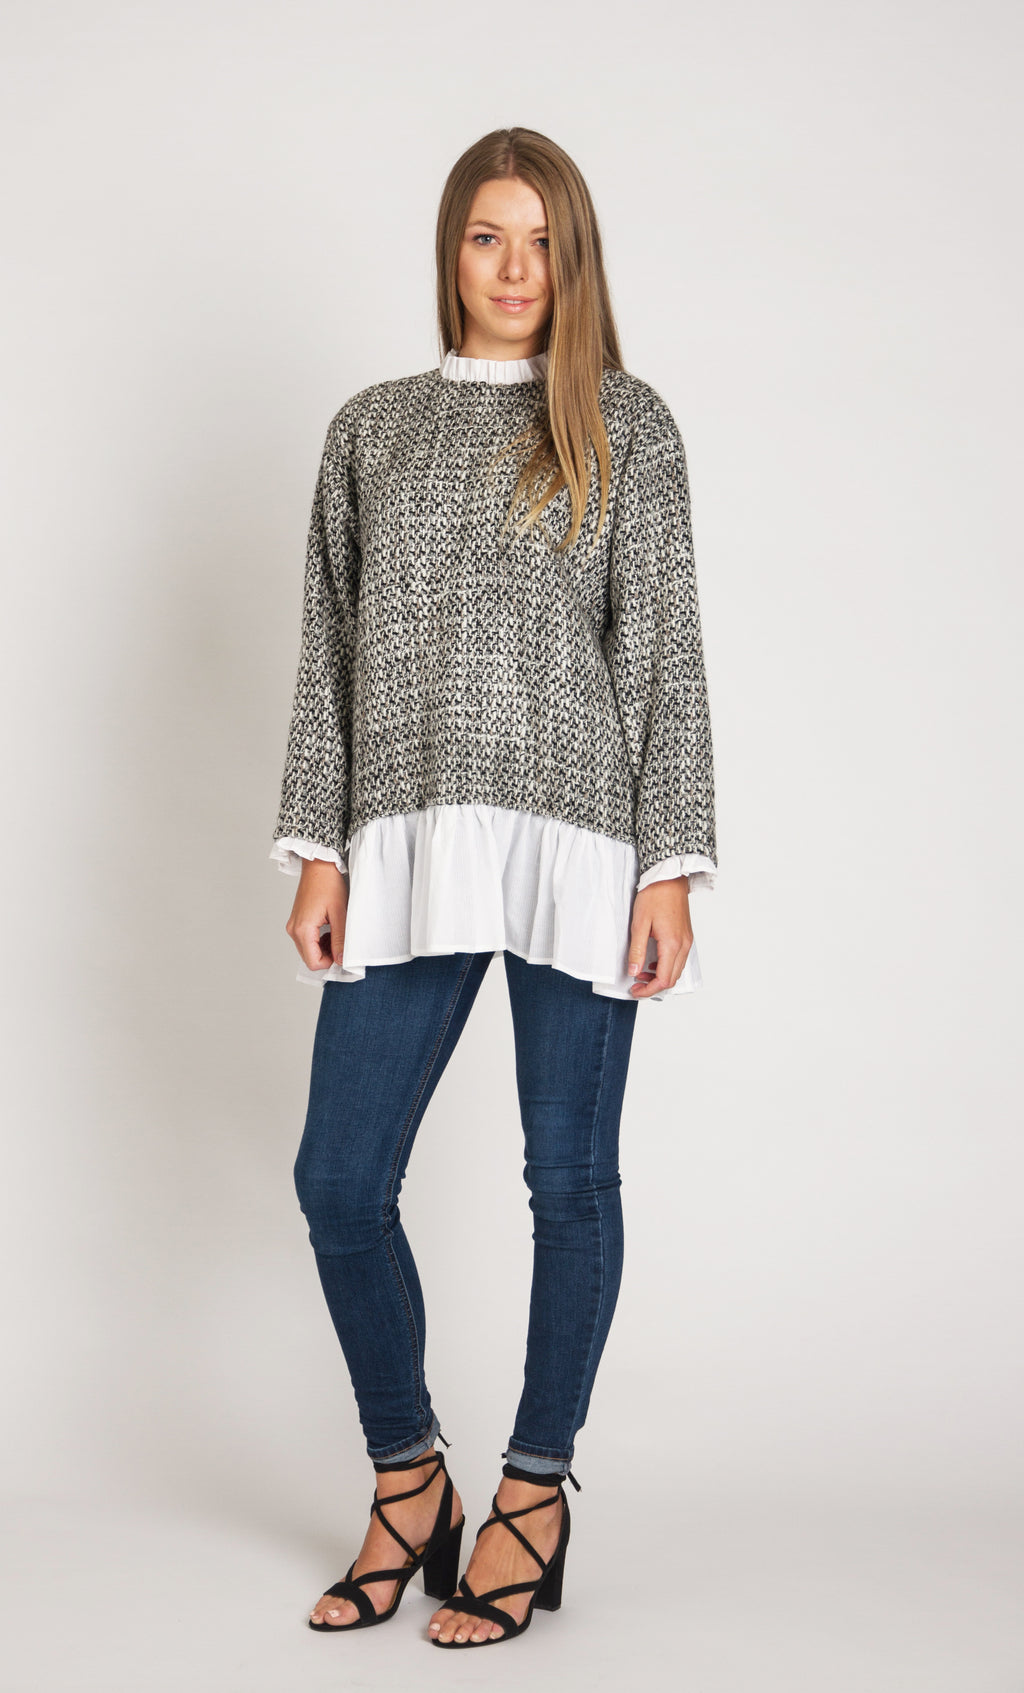 Woven Top with Sleeve and Hem Flounce